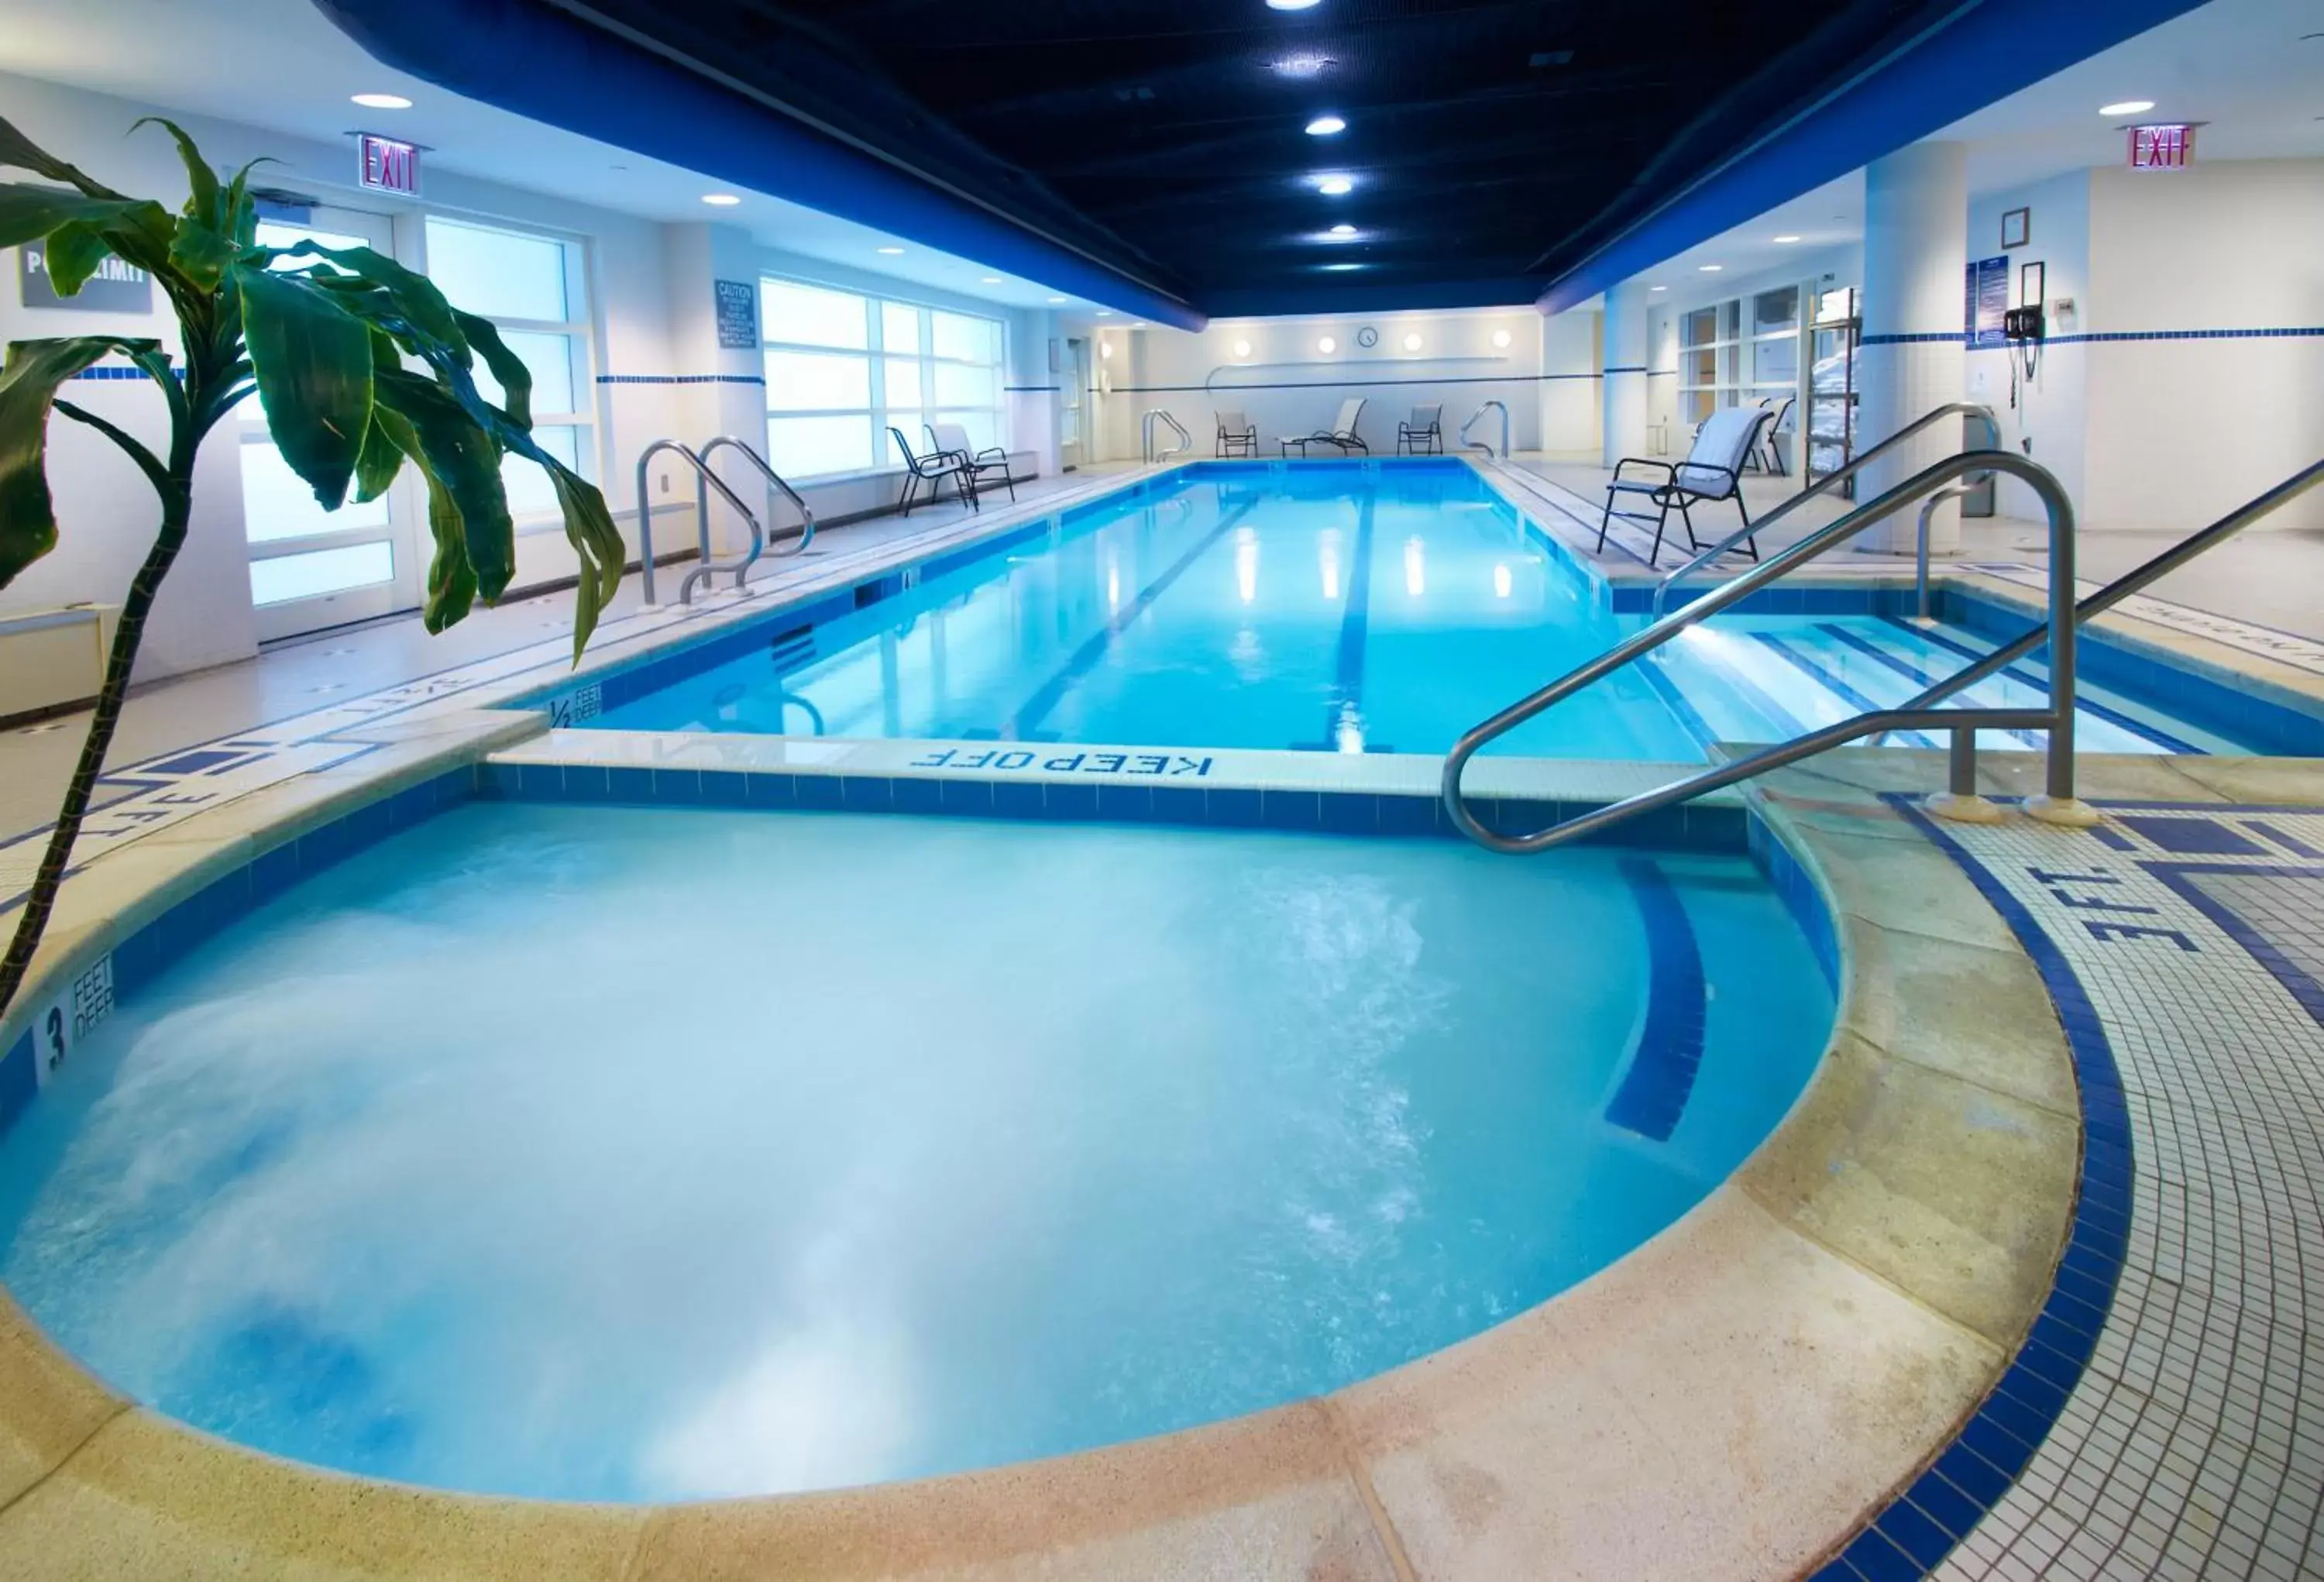 Swimming Pool in The Penn Stater Hotel and Conference Center